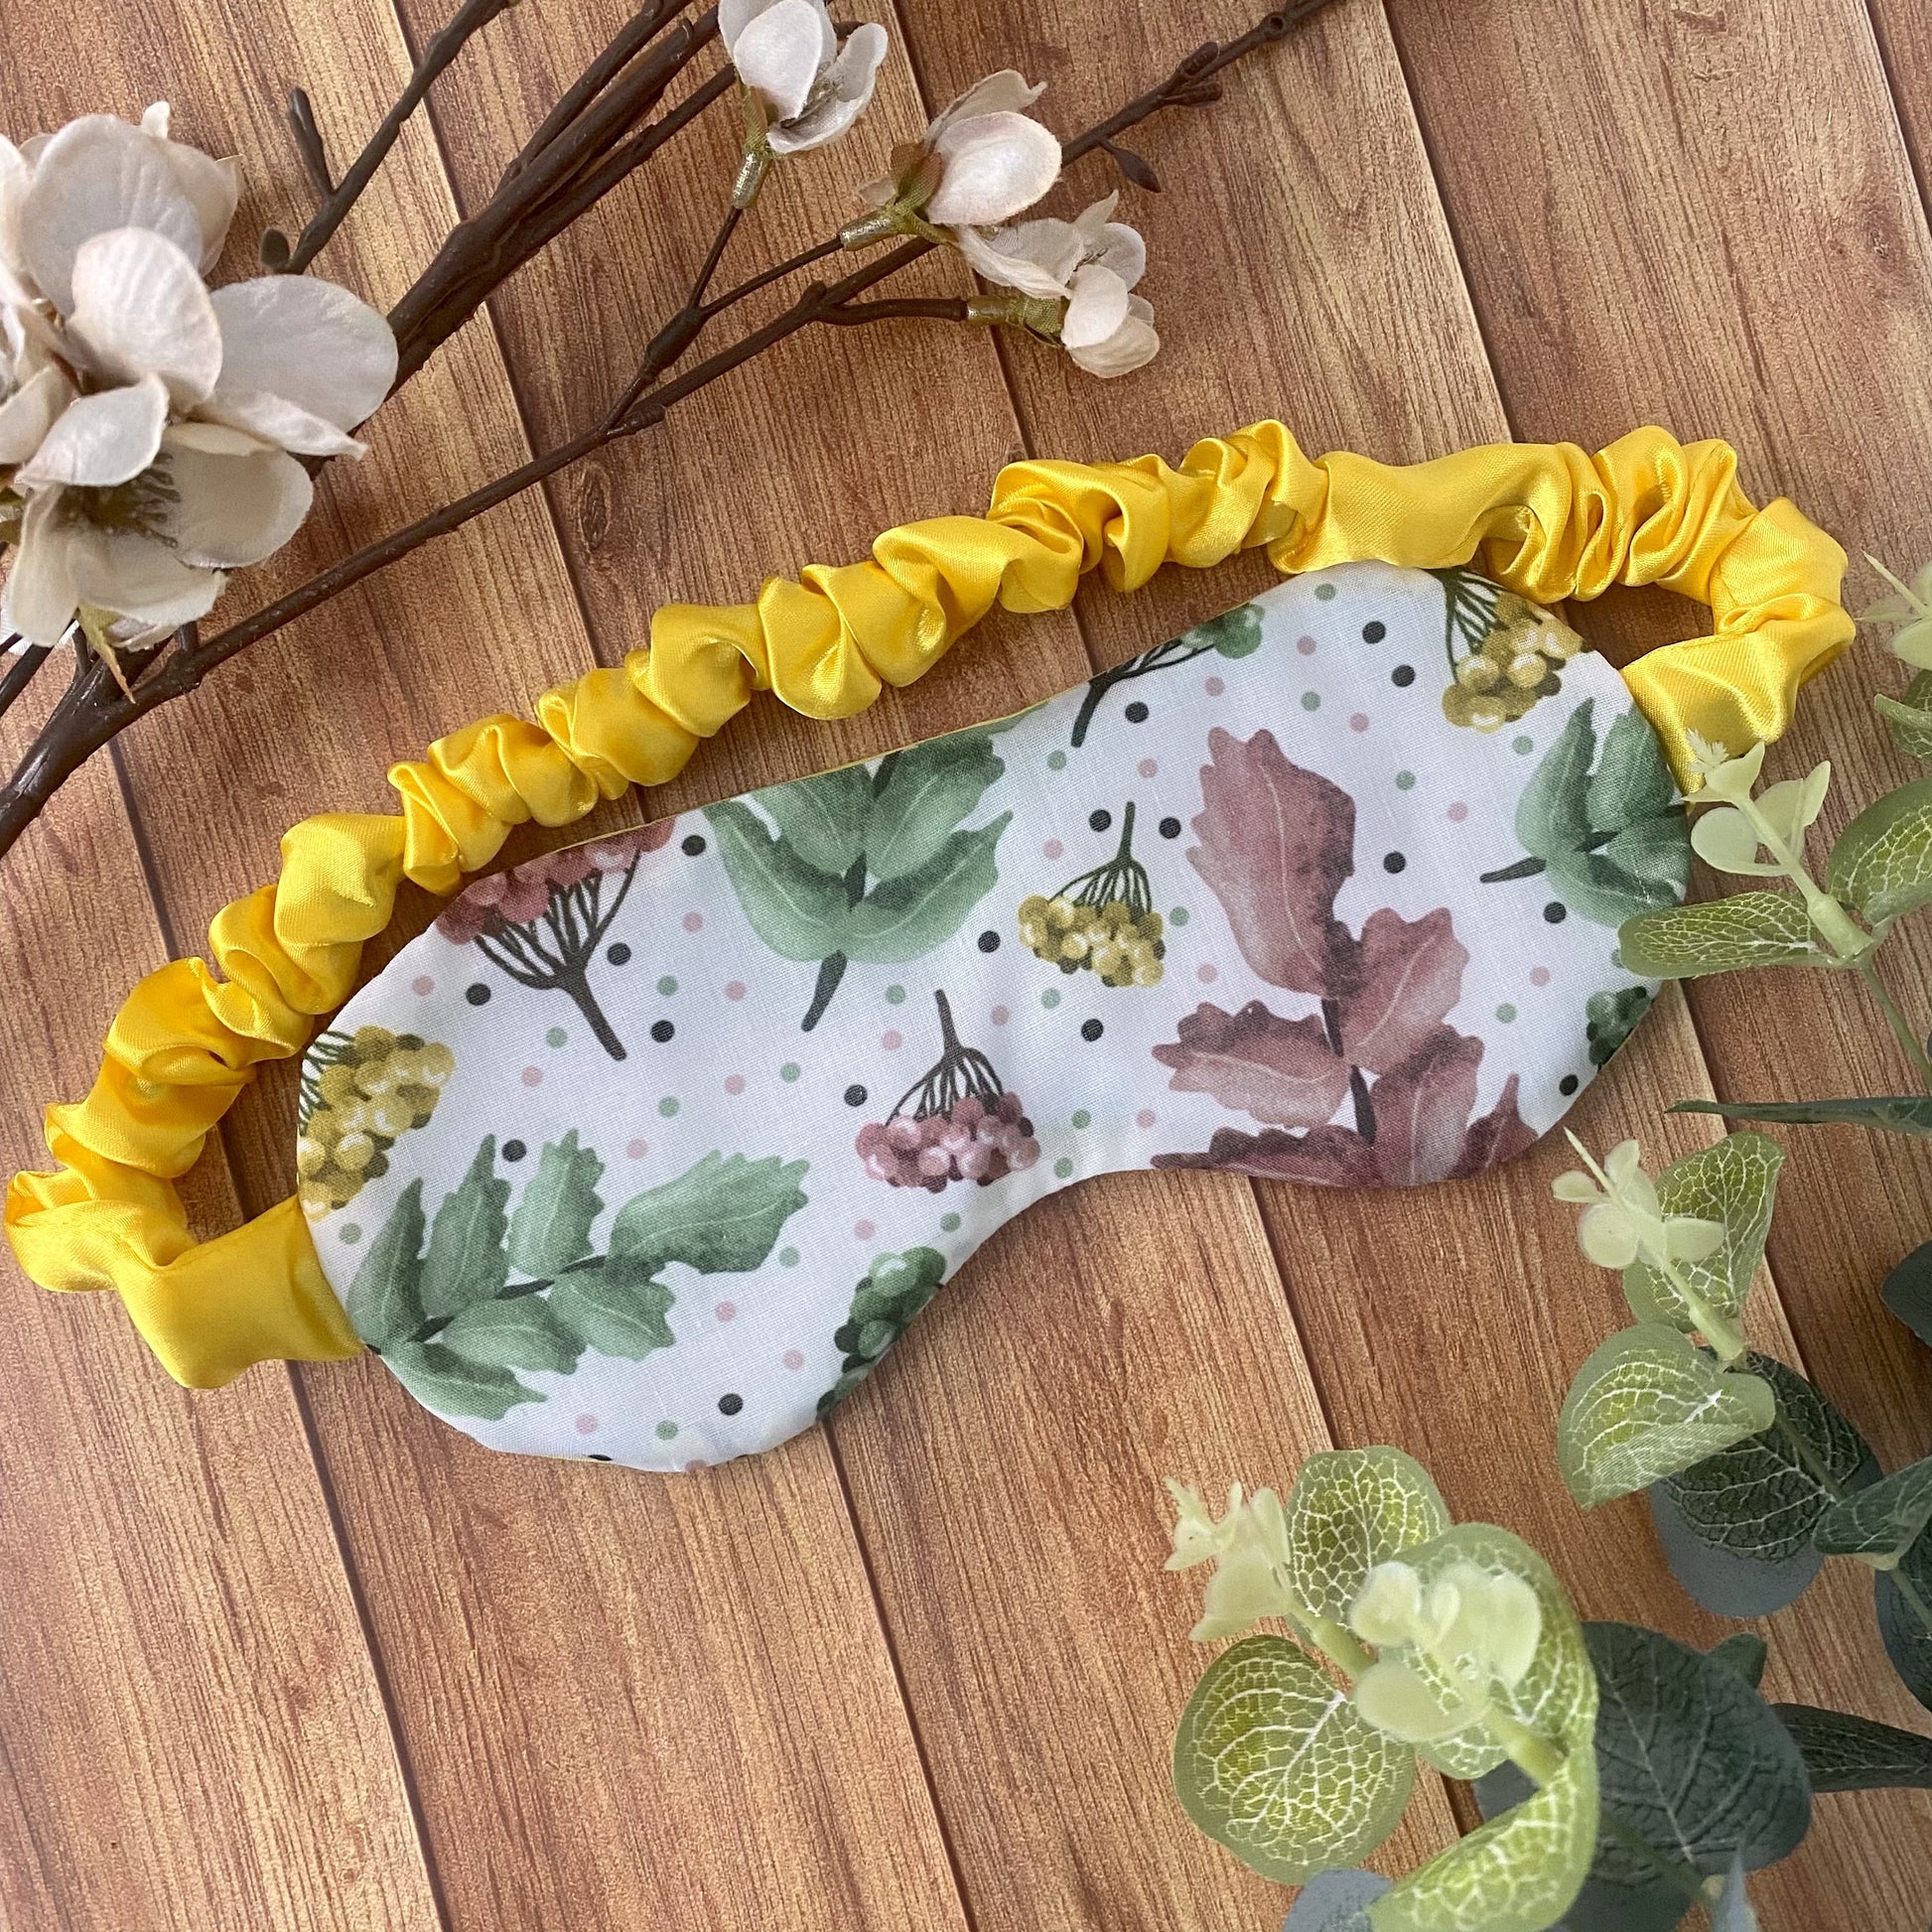 pretty foliage patterned sleepmask with scrunched satin strap on wooden background with flowers and foliage around it